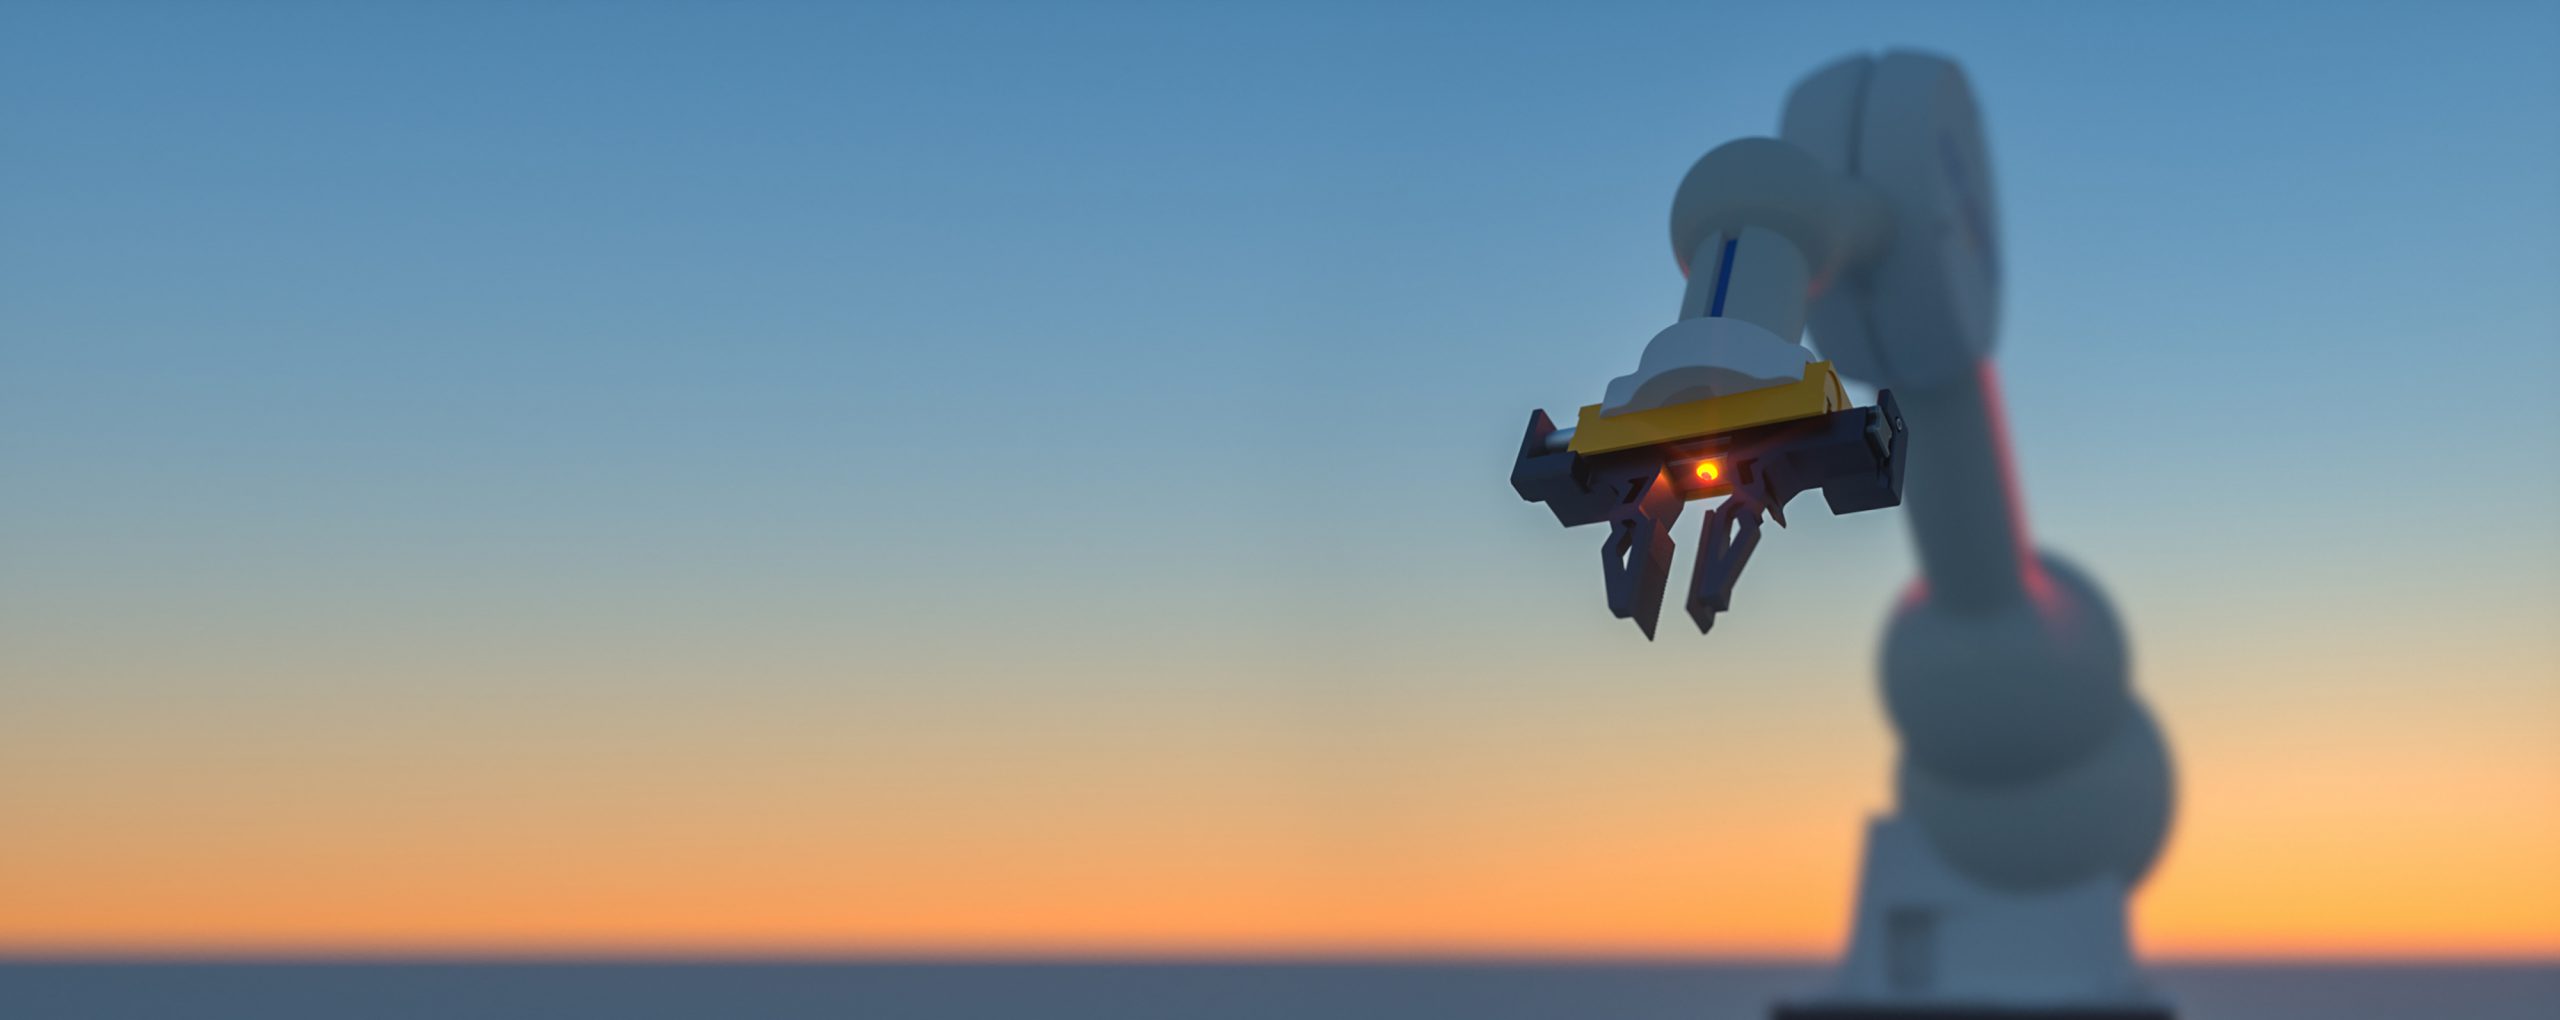 Image of robotic arm with the sunset in the background.